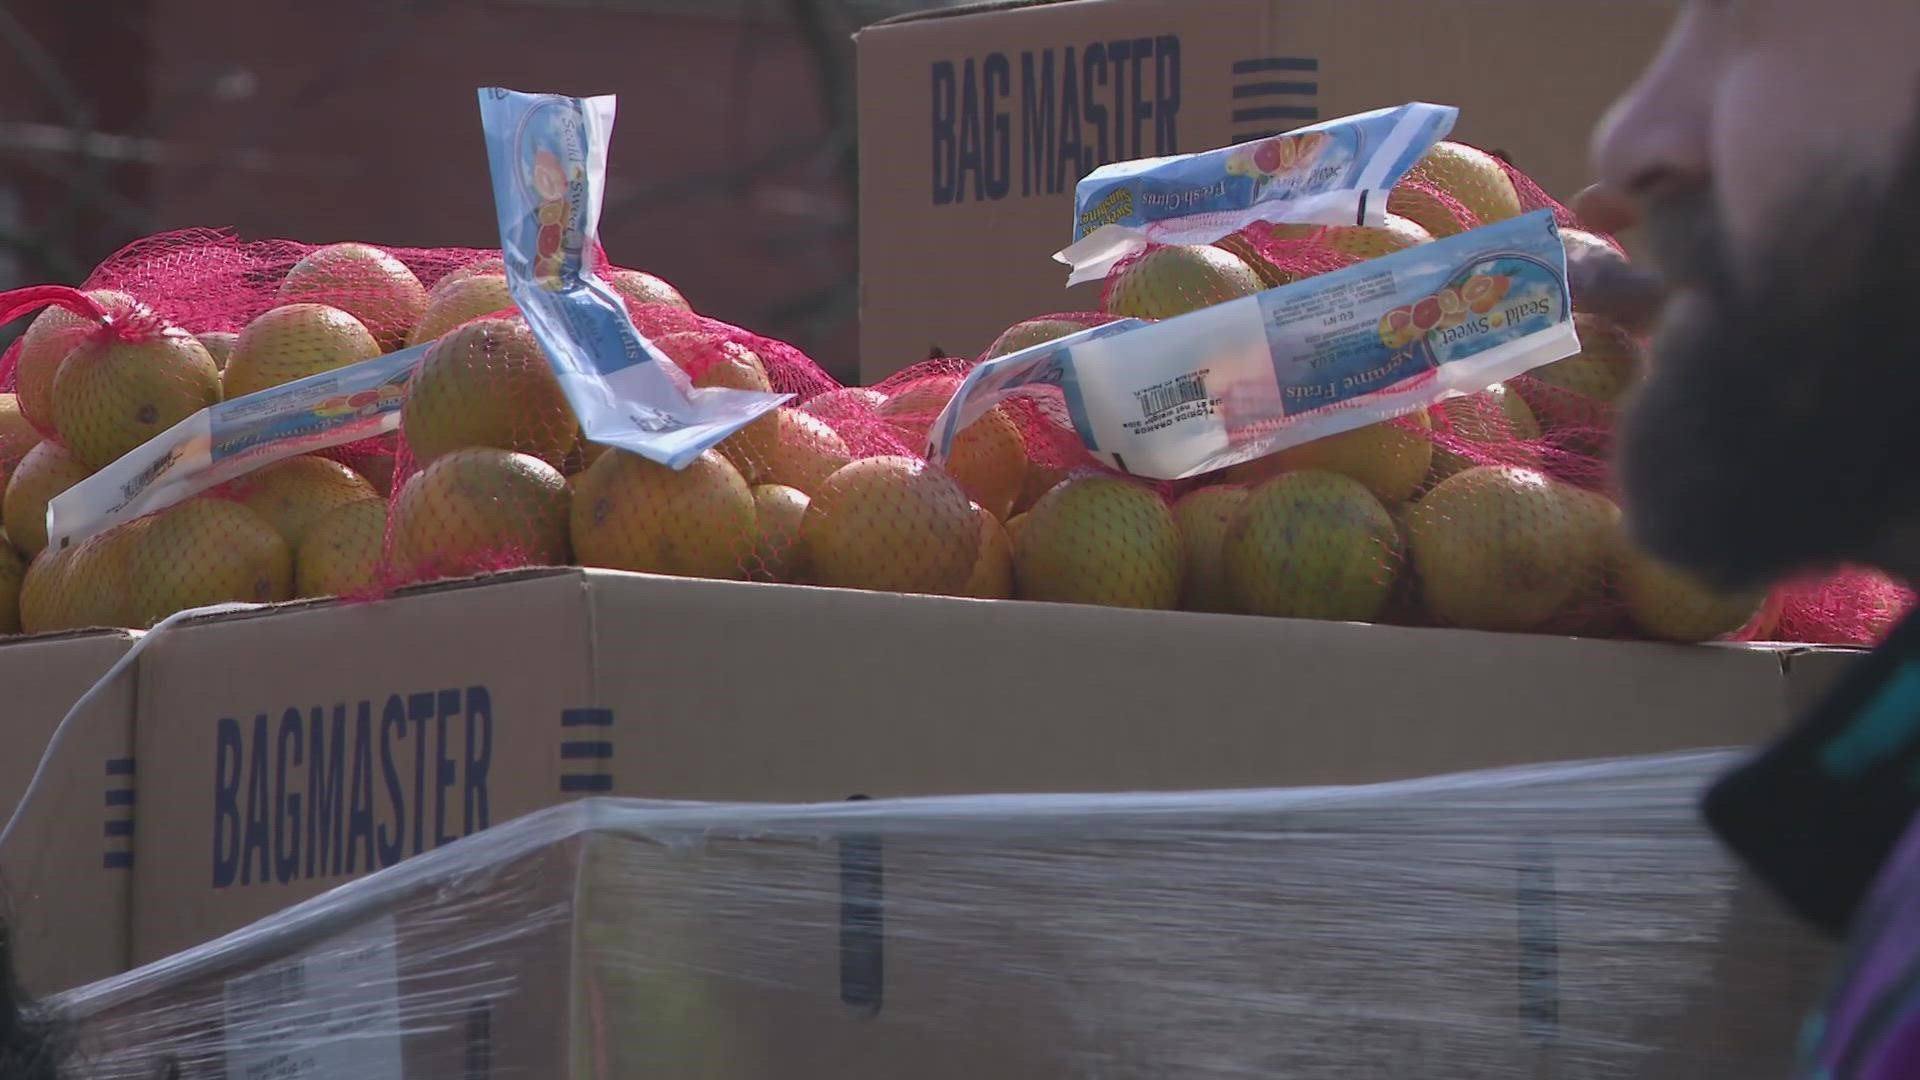 The were offering fresh produce and shelf-stable foods to those impacted by Friday's storm.